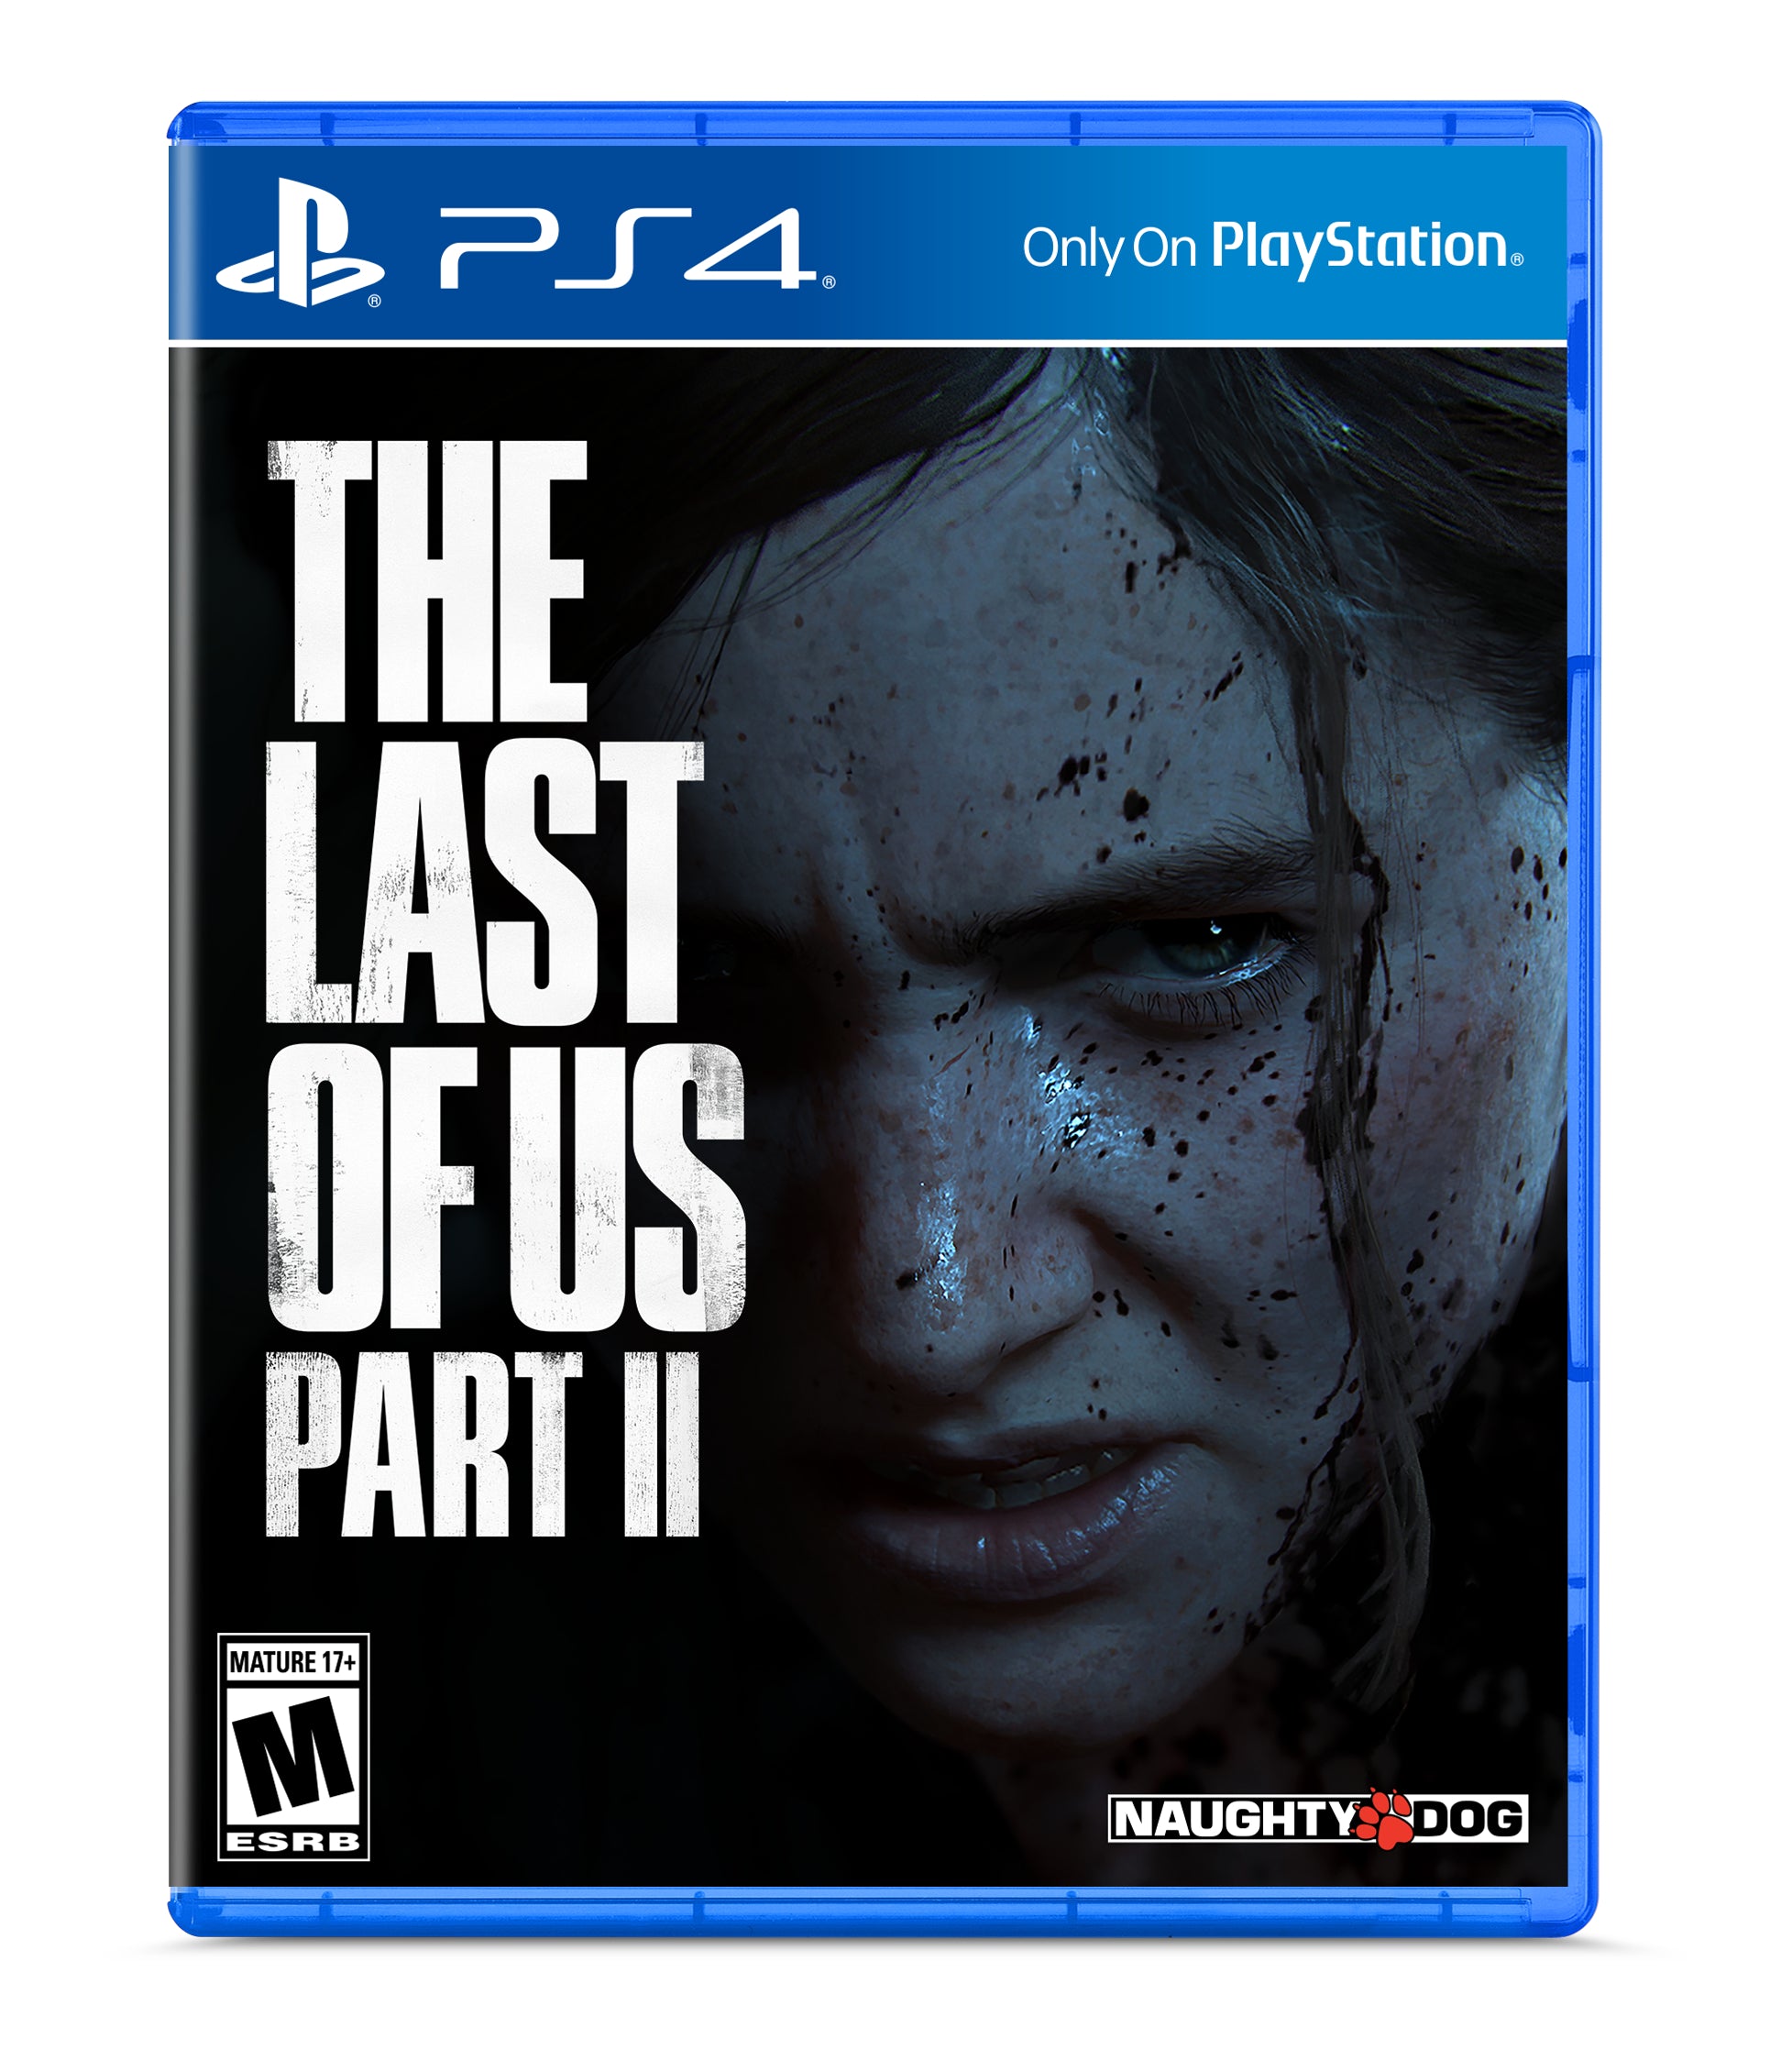 Sony PlayStation 4 Slim The Last of Us Part II Bundle Upgrade 1TB SSD PS4 Gaming Console, Jet Black, with Mytrix Chat Headset - Internal Fast Solid State Drive Enhanced PS4 Console